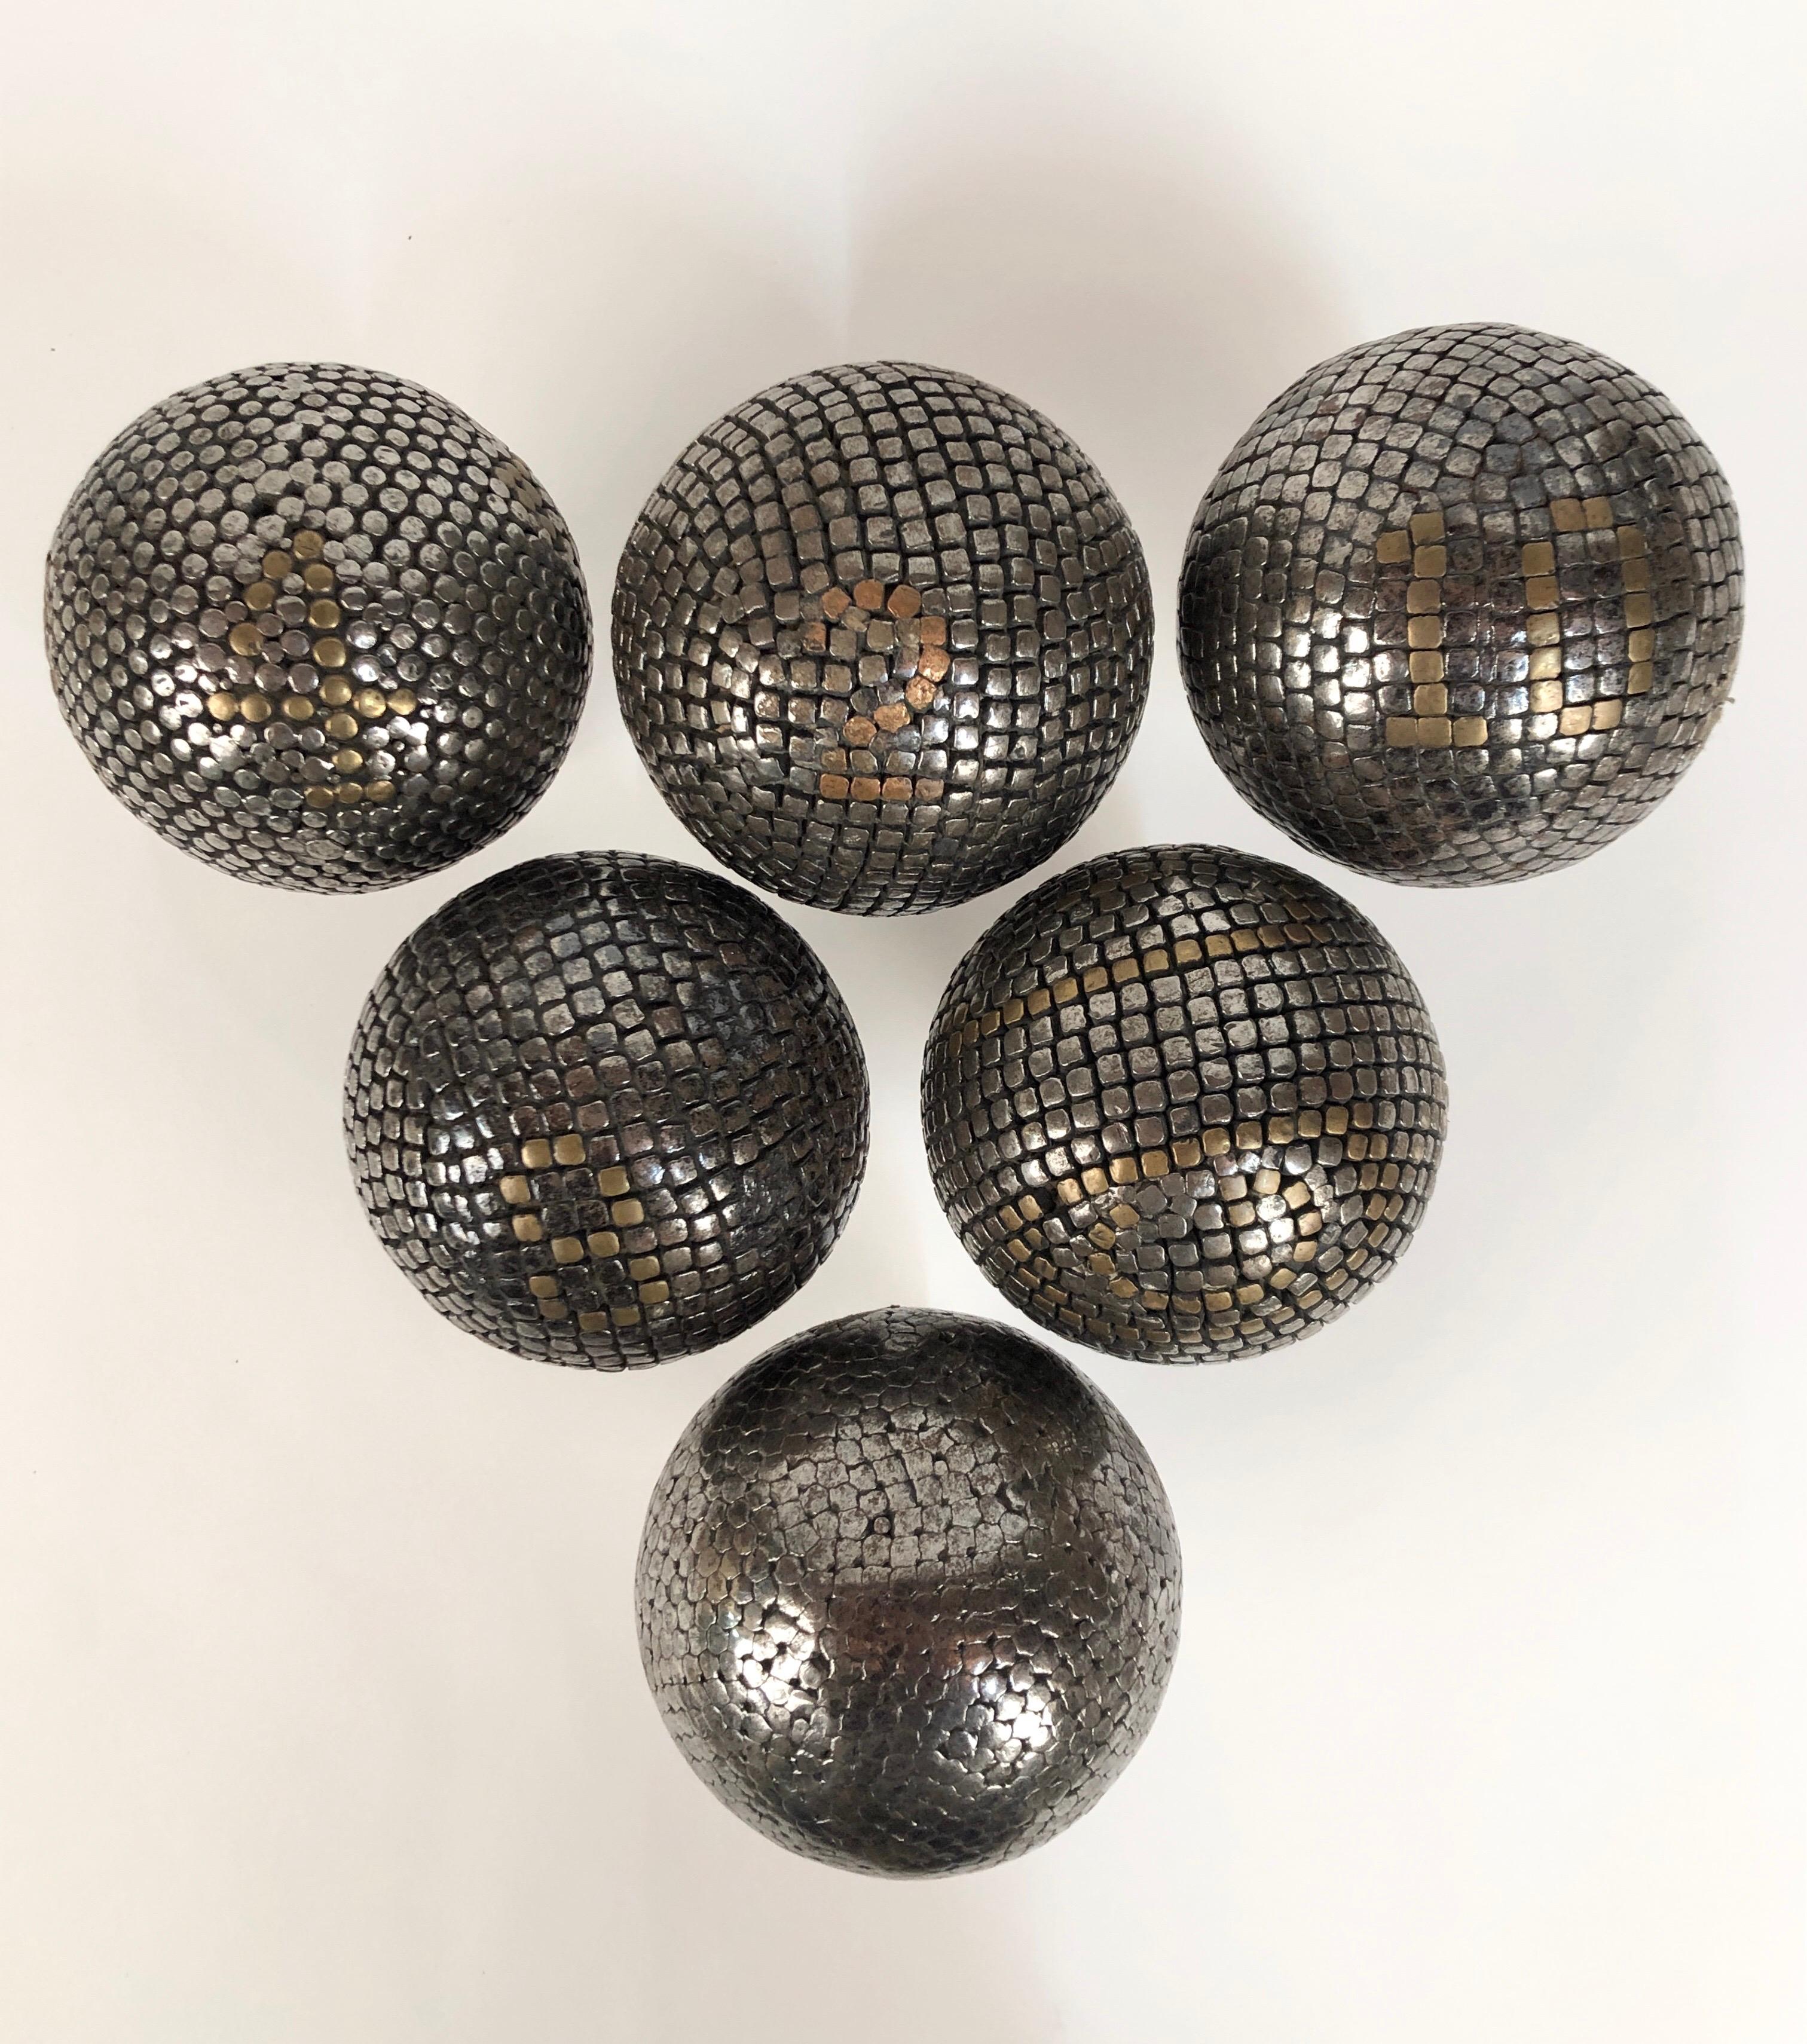 A collection of 6 antique steel and brass studded petanque balls. Used in a game similar to bocce. All six come with Lucite stands. Most with brass inlaid numbers.